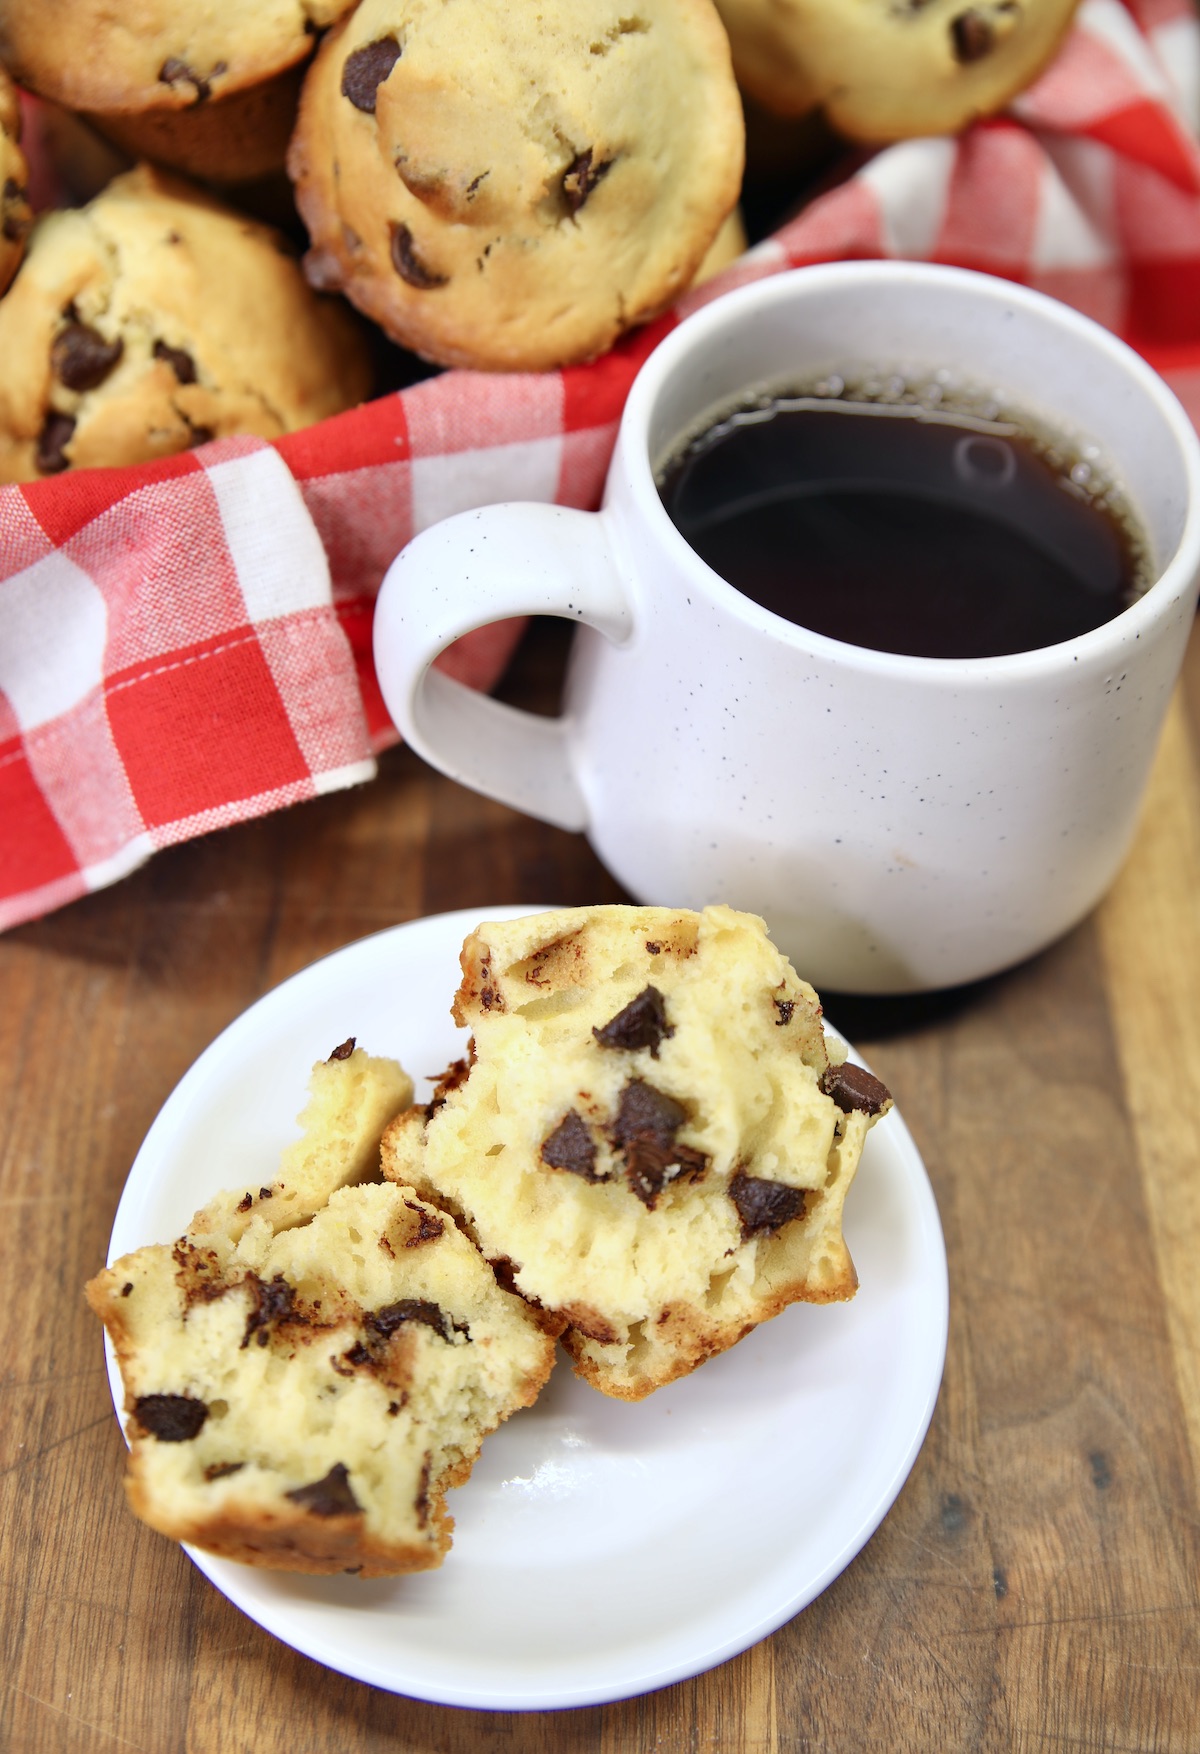 Chocolate chip muffin on a plate, split open, cup of coffee, basket of muffins.